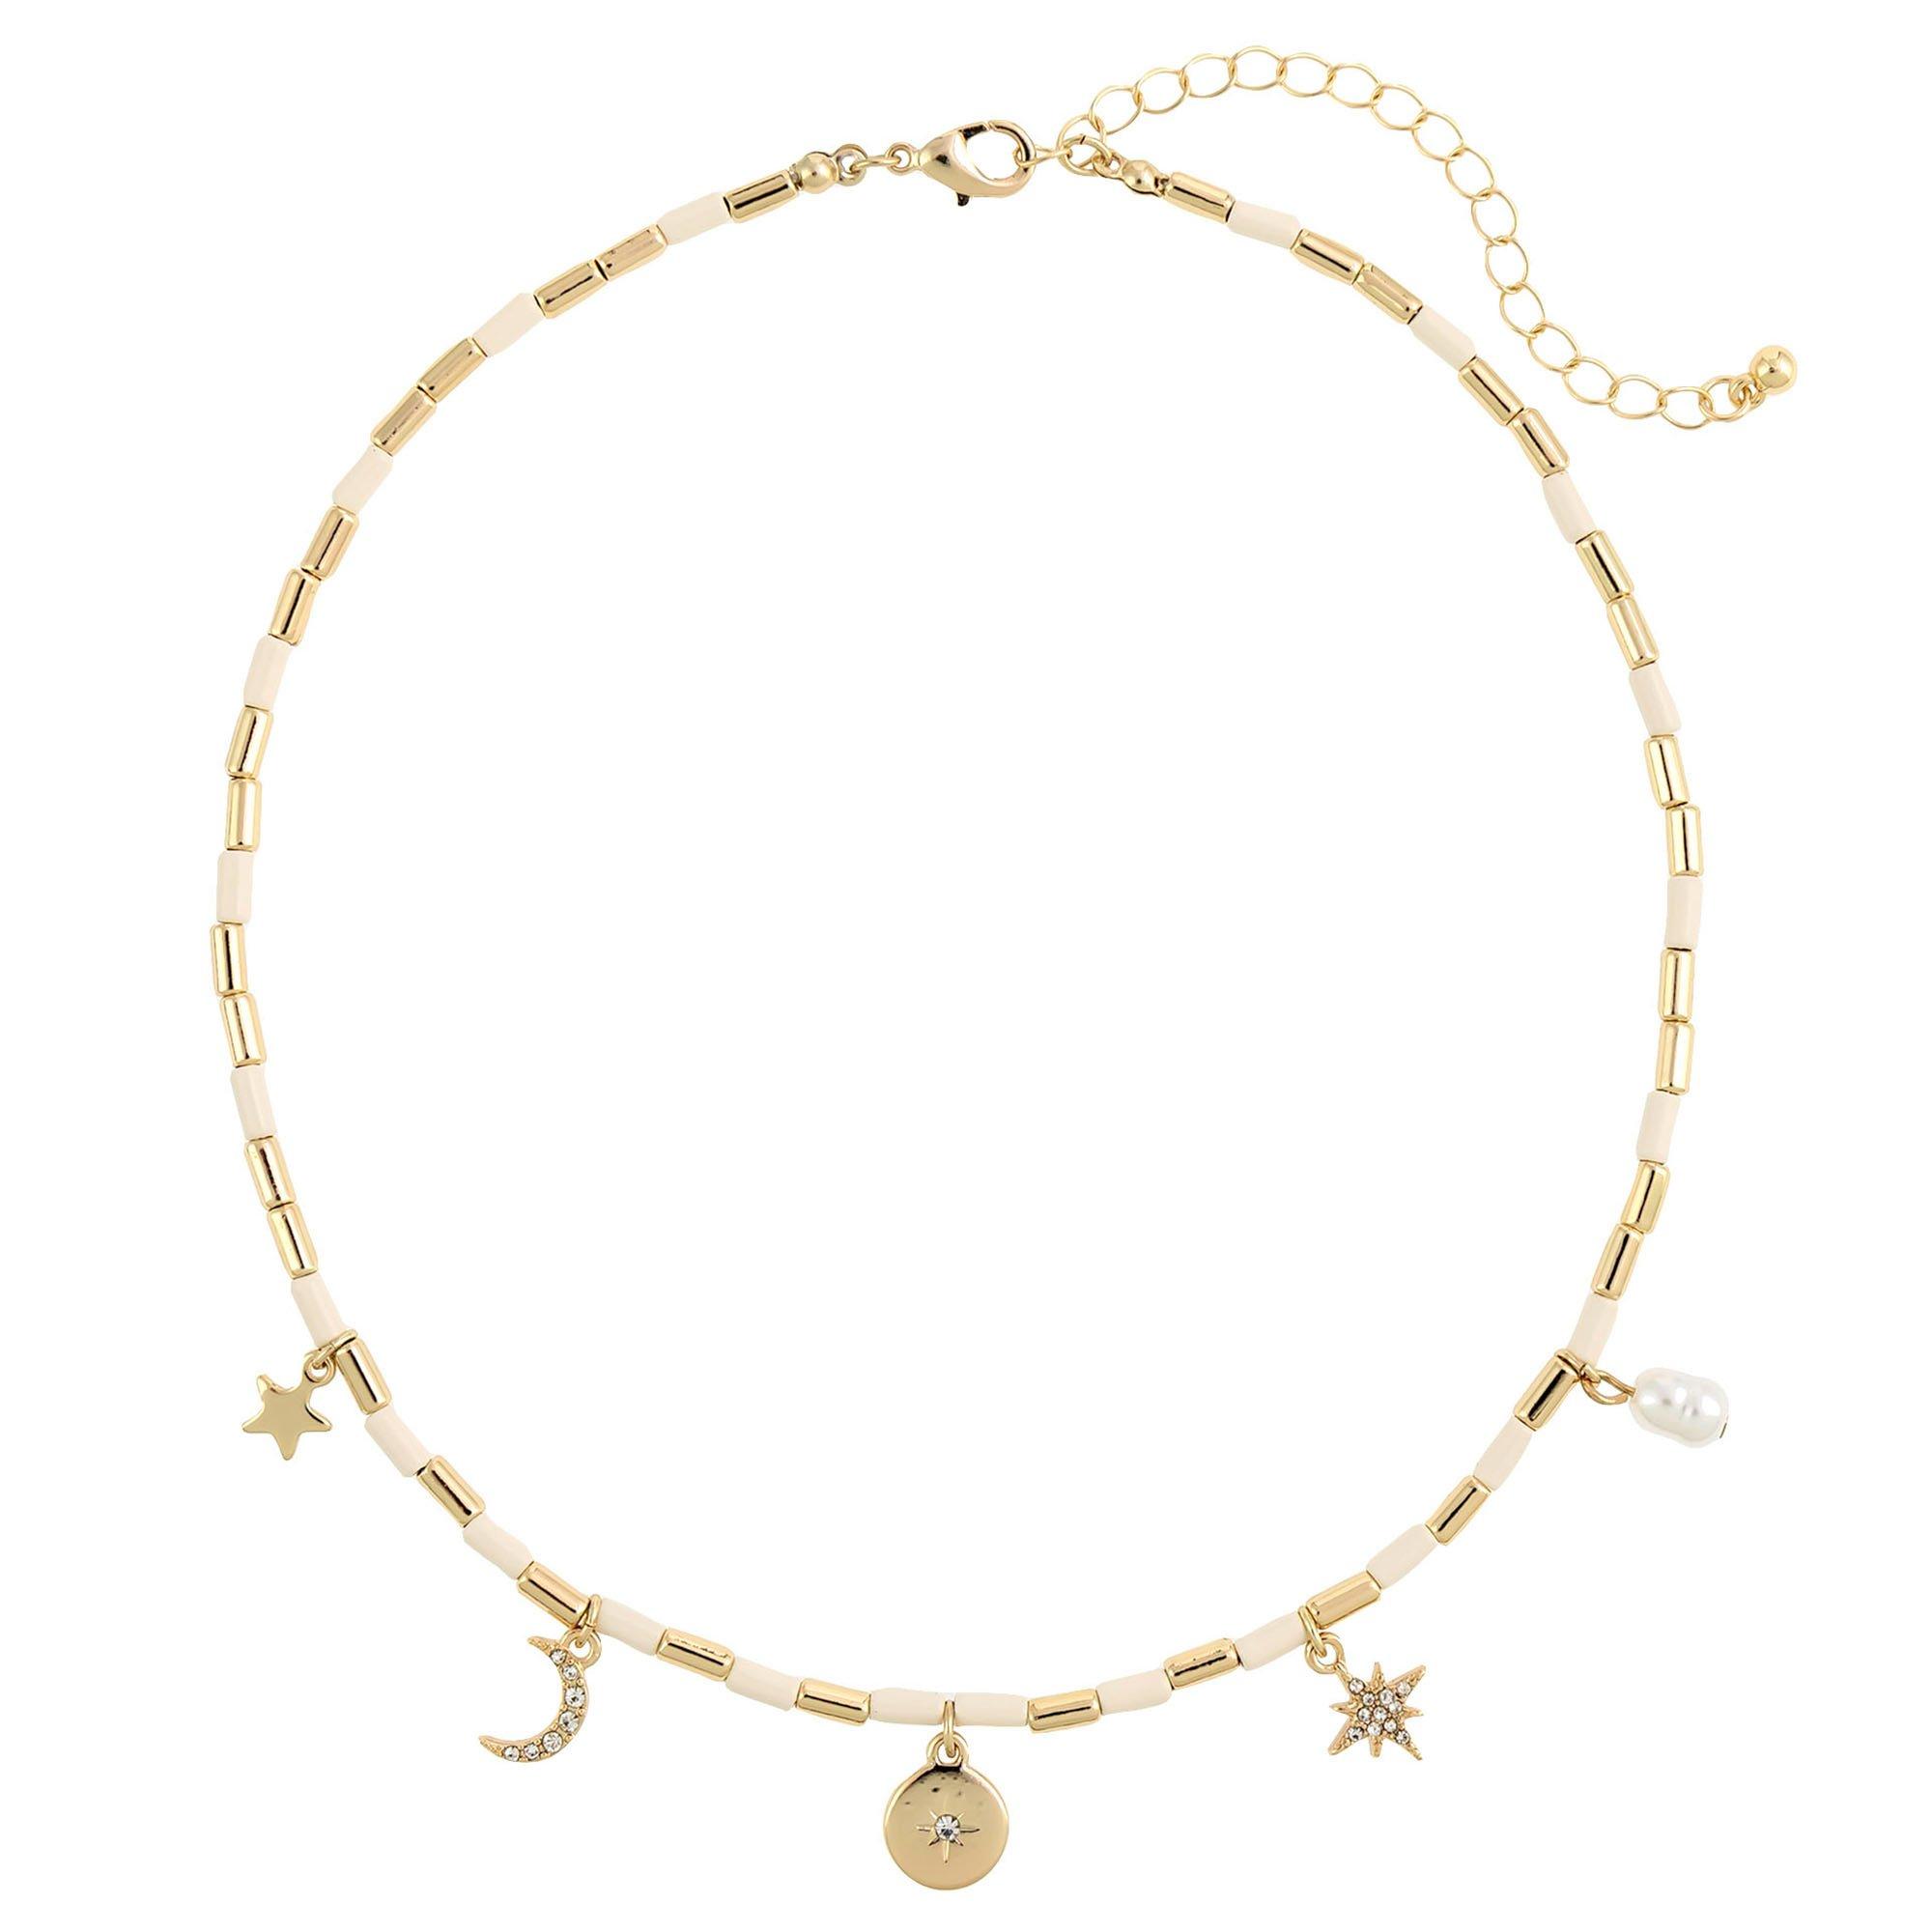 Bunulu 14 In. Pave Moon & Star Charms Bead Necklace